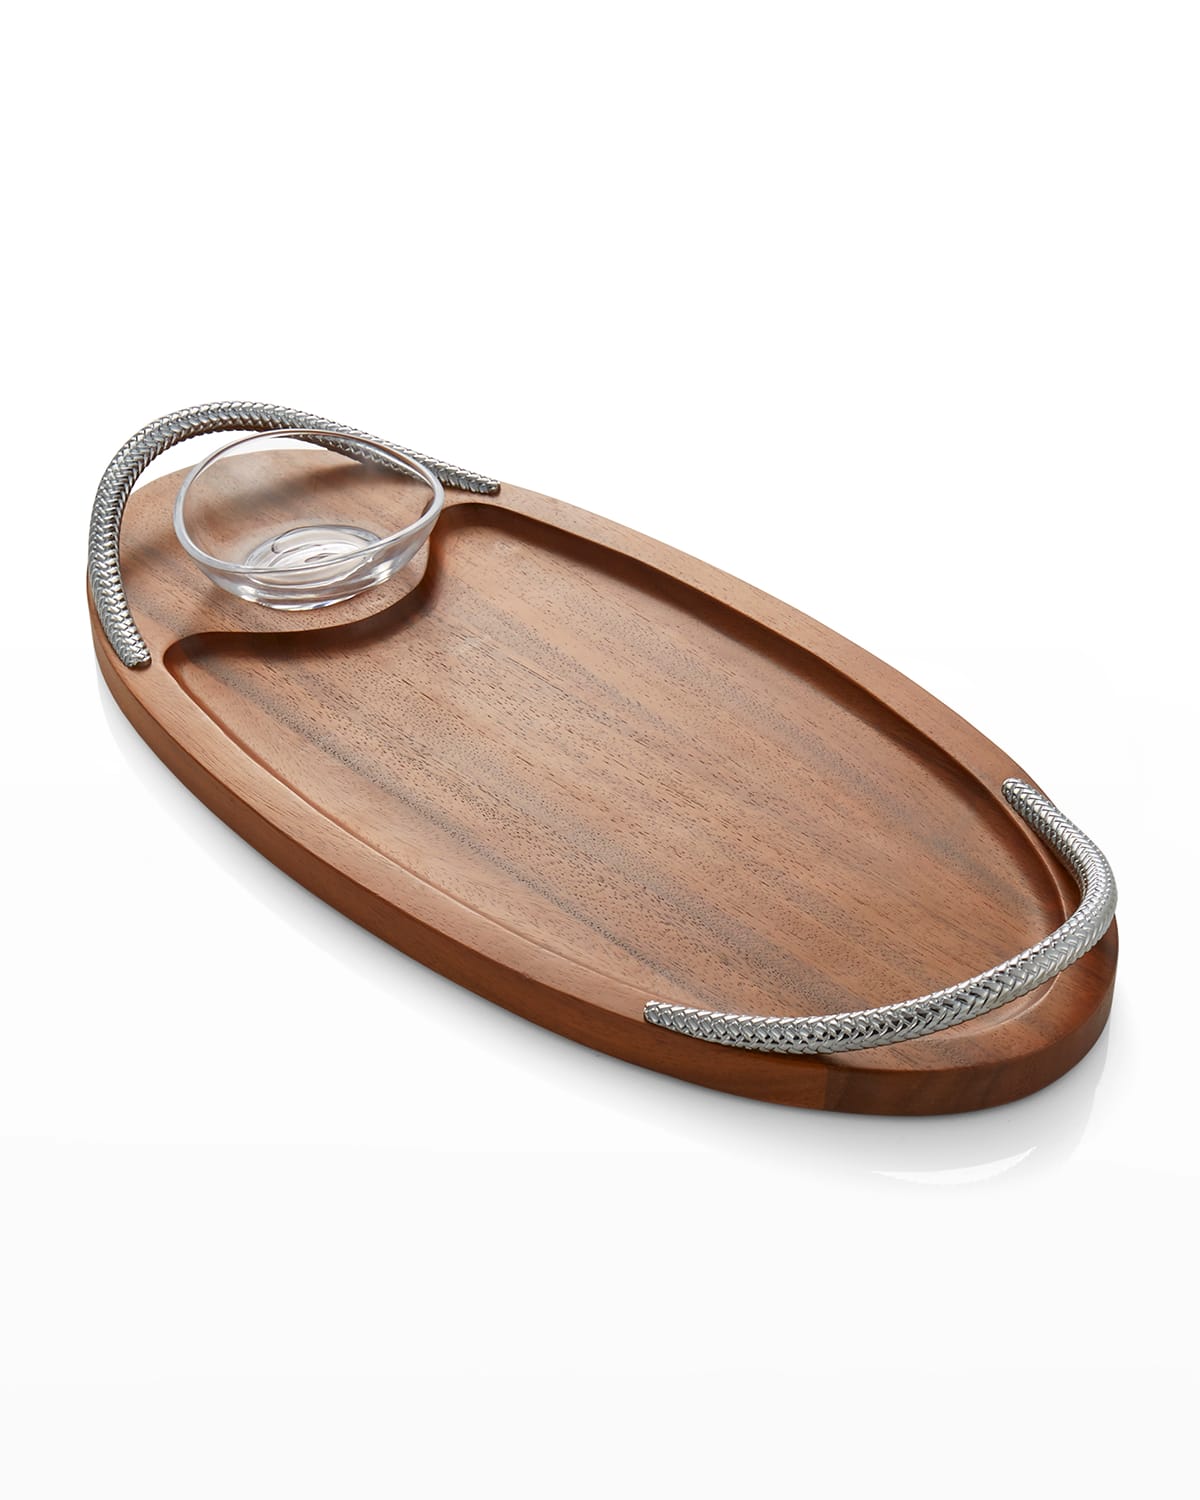 NAMBE BRAID SERVING BOARD WITH DIPPING DISH